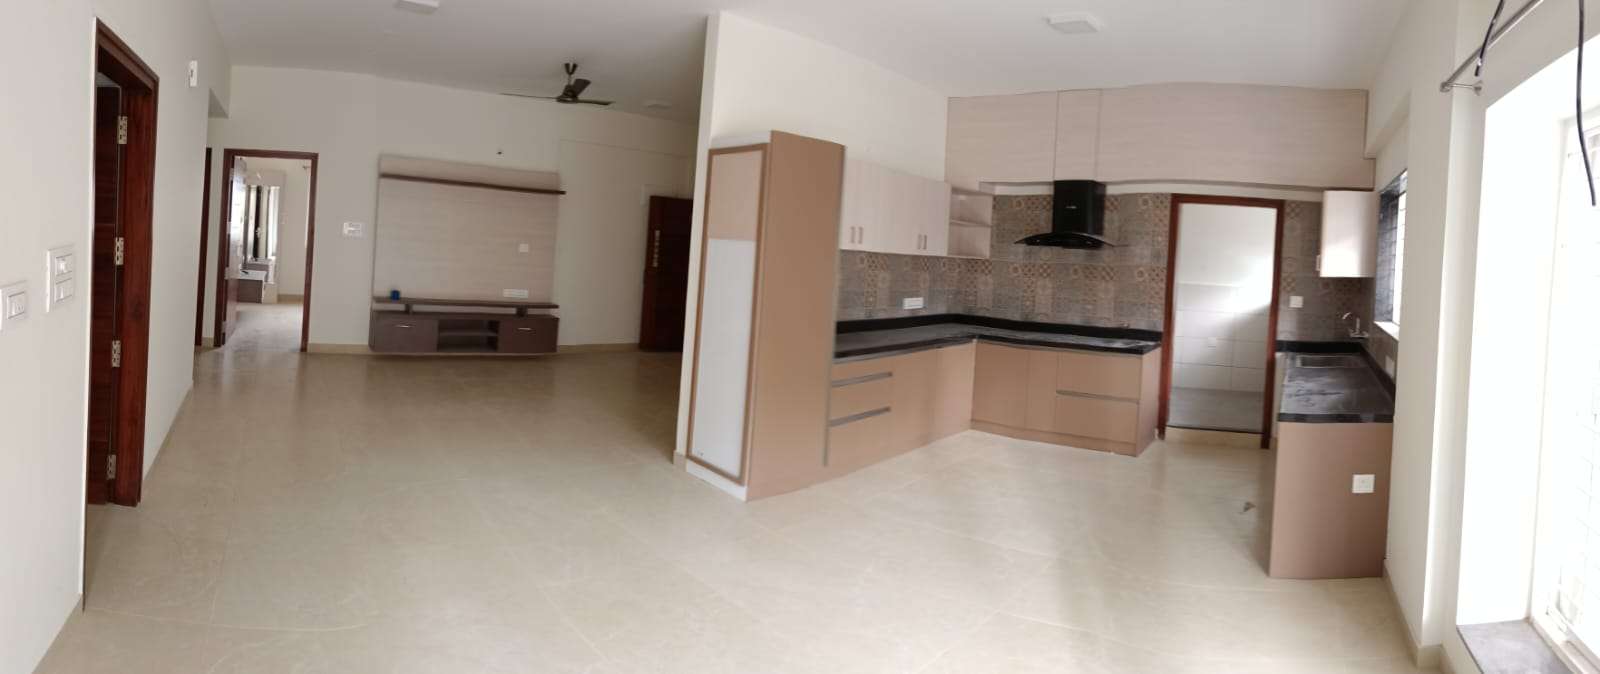 1 BHK Flats for Rent in Jayanagar 3rd Block Bangalore Without